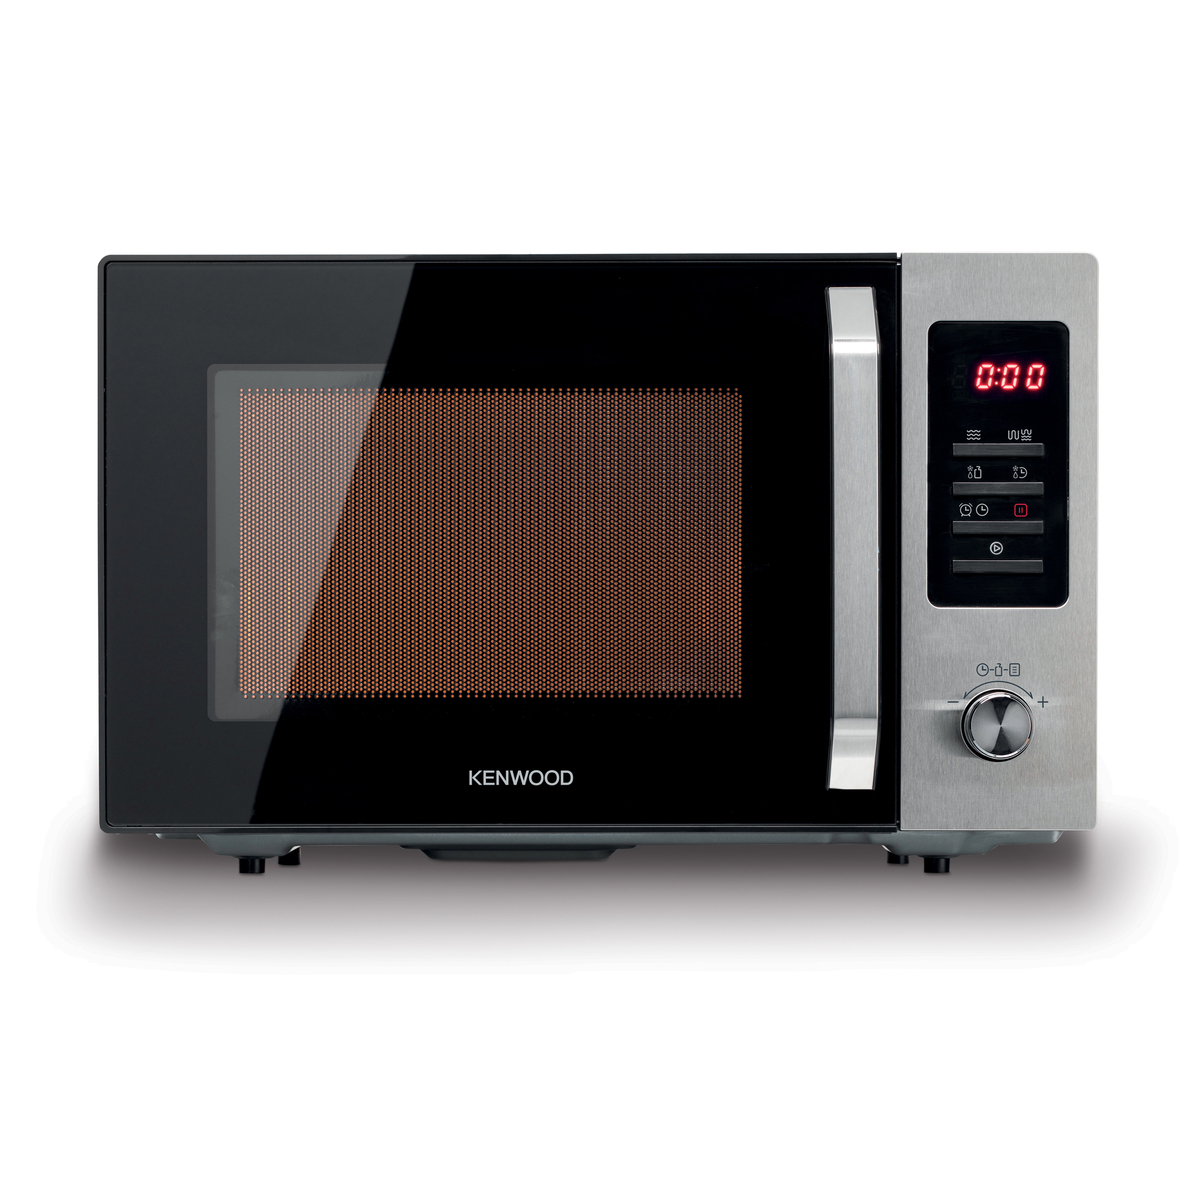 Kenwood 30LTR Microwave With Grill, MWM30.000BK Online at Best Price